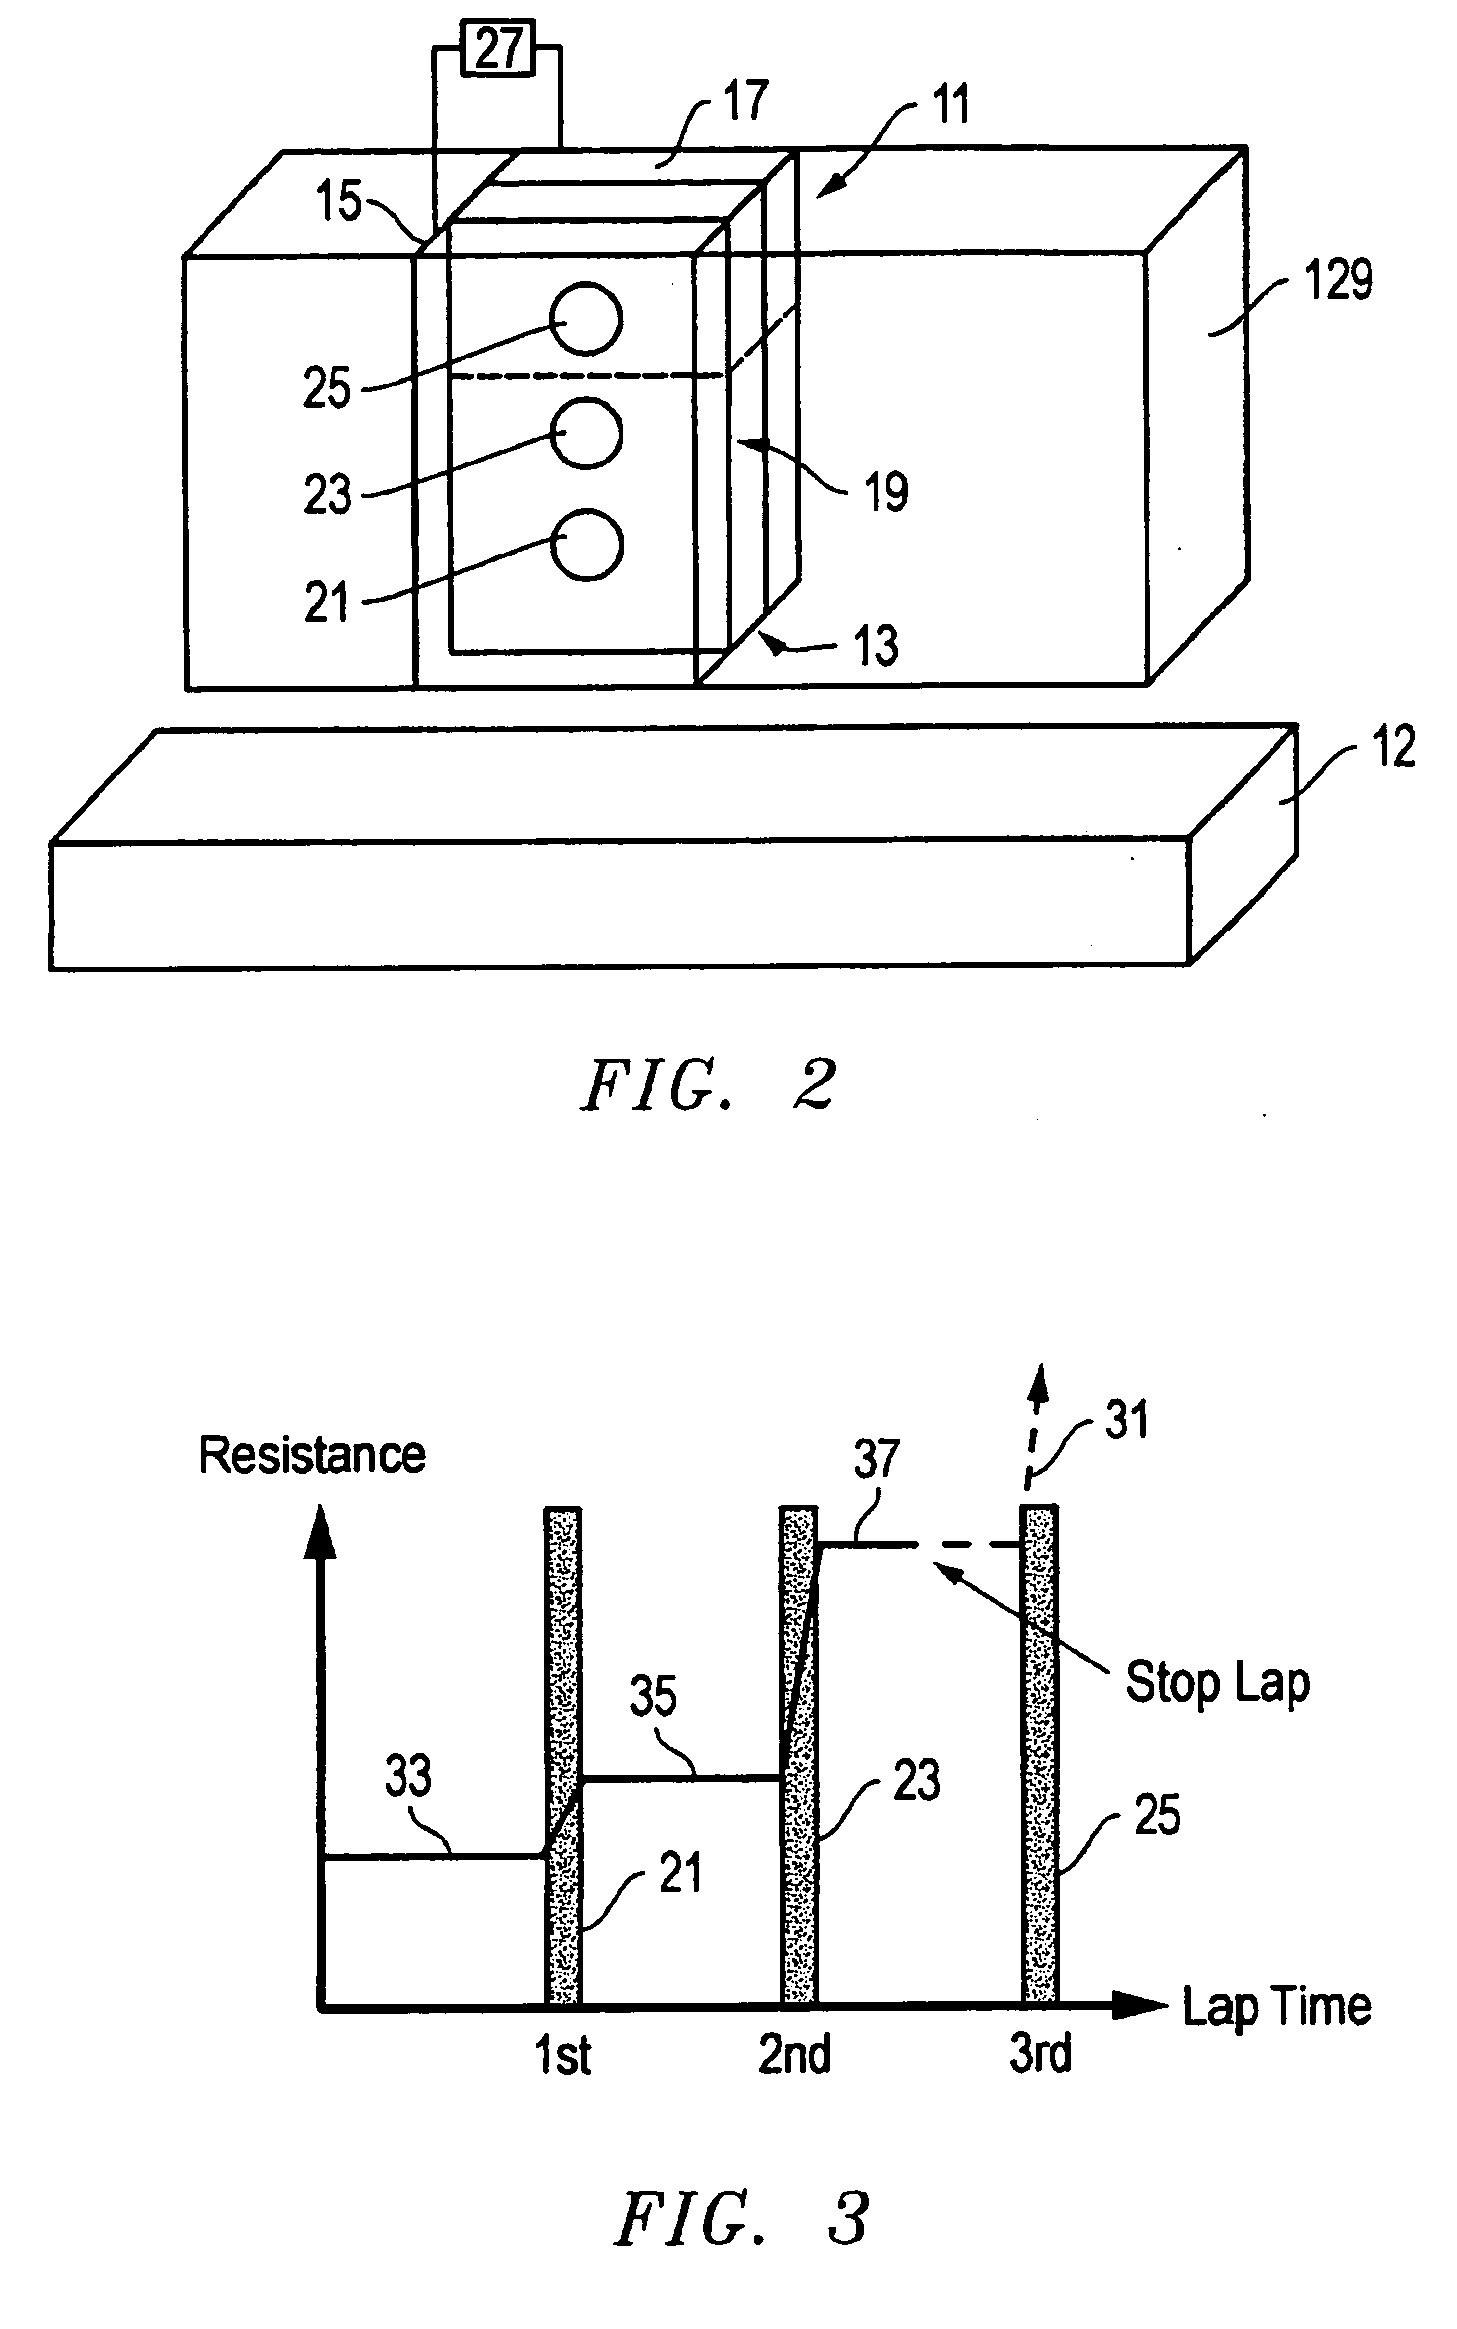 System, method, and apparatus for linear array of current perpendicular to the plane apertures for lap control